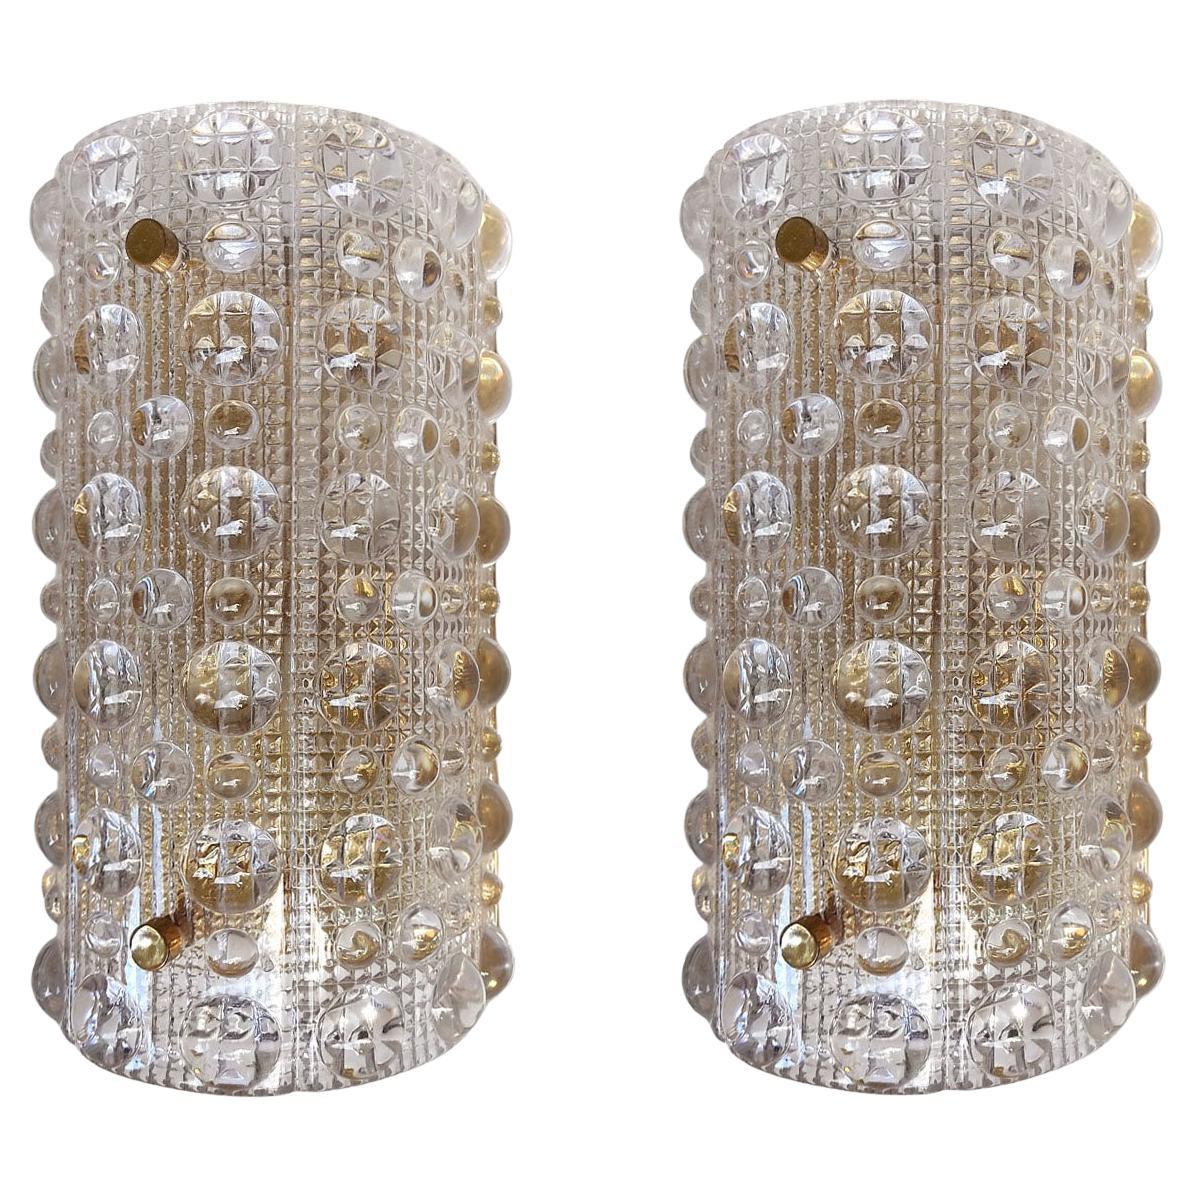 Pair of Large Vintage Crystal Bubble Glass Wall Lights Sconces, 1960s For Sale